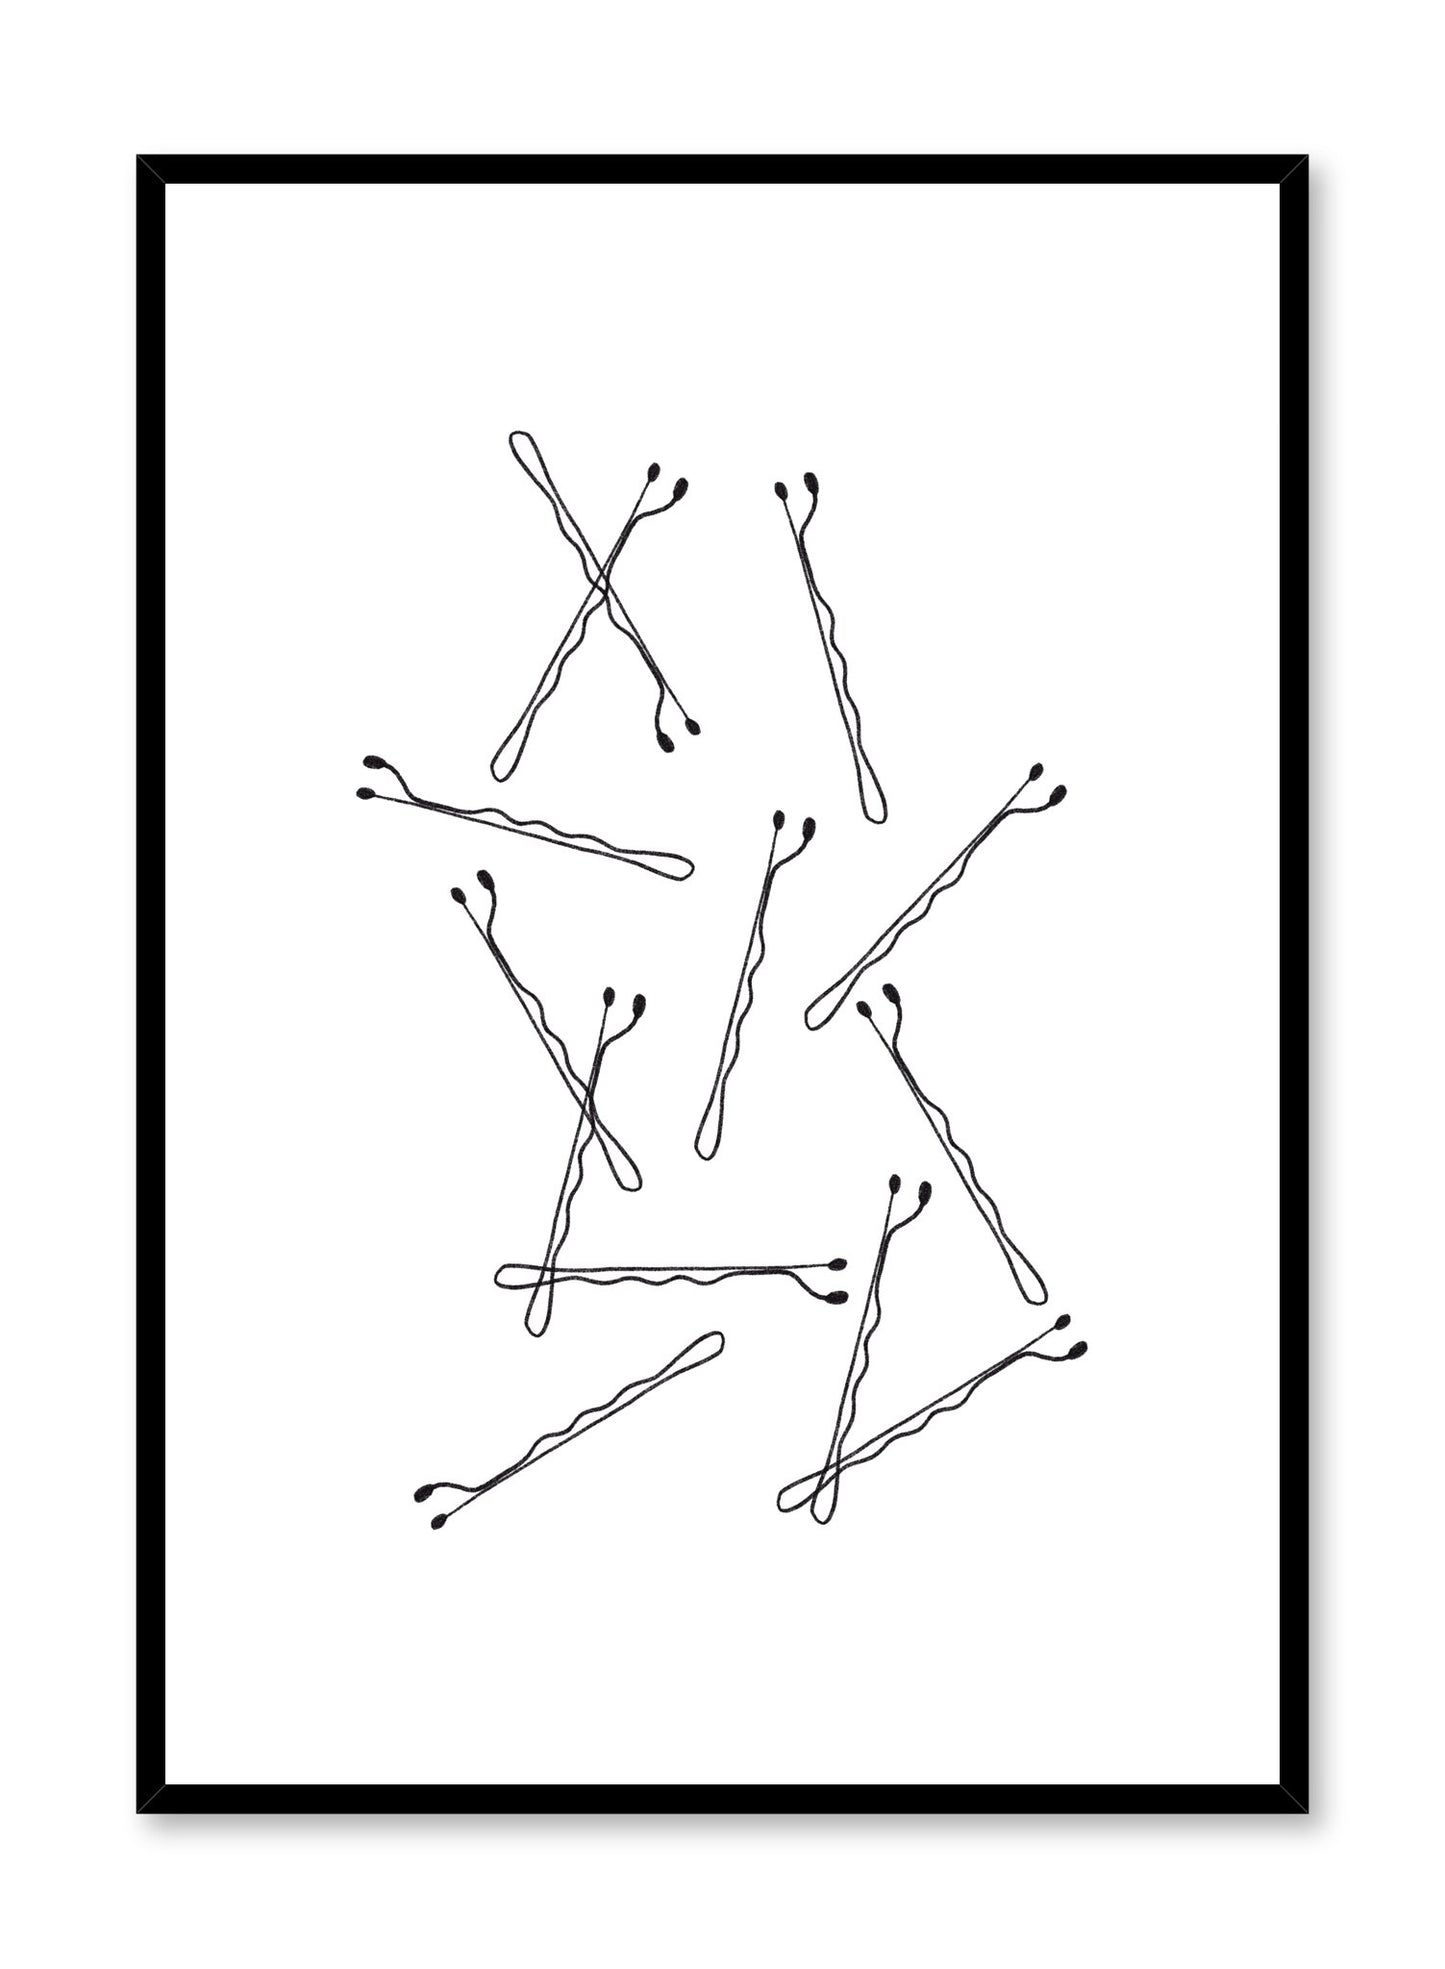 Fashion illustration poster by Opposite Wall with bobby pins